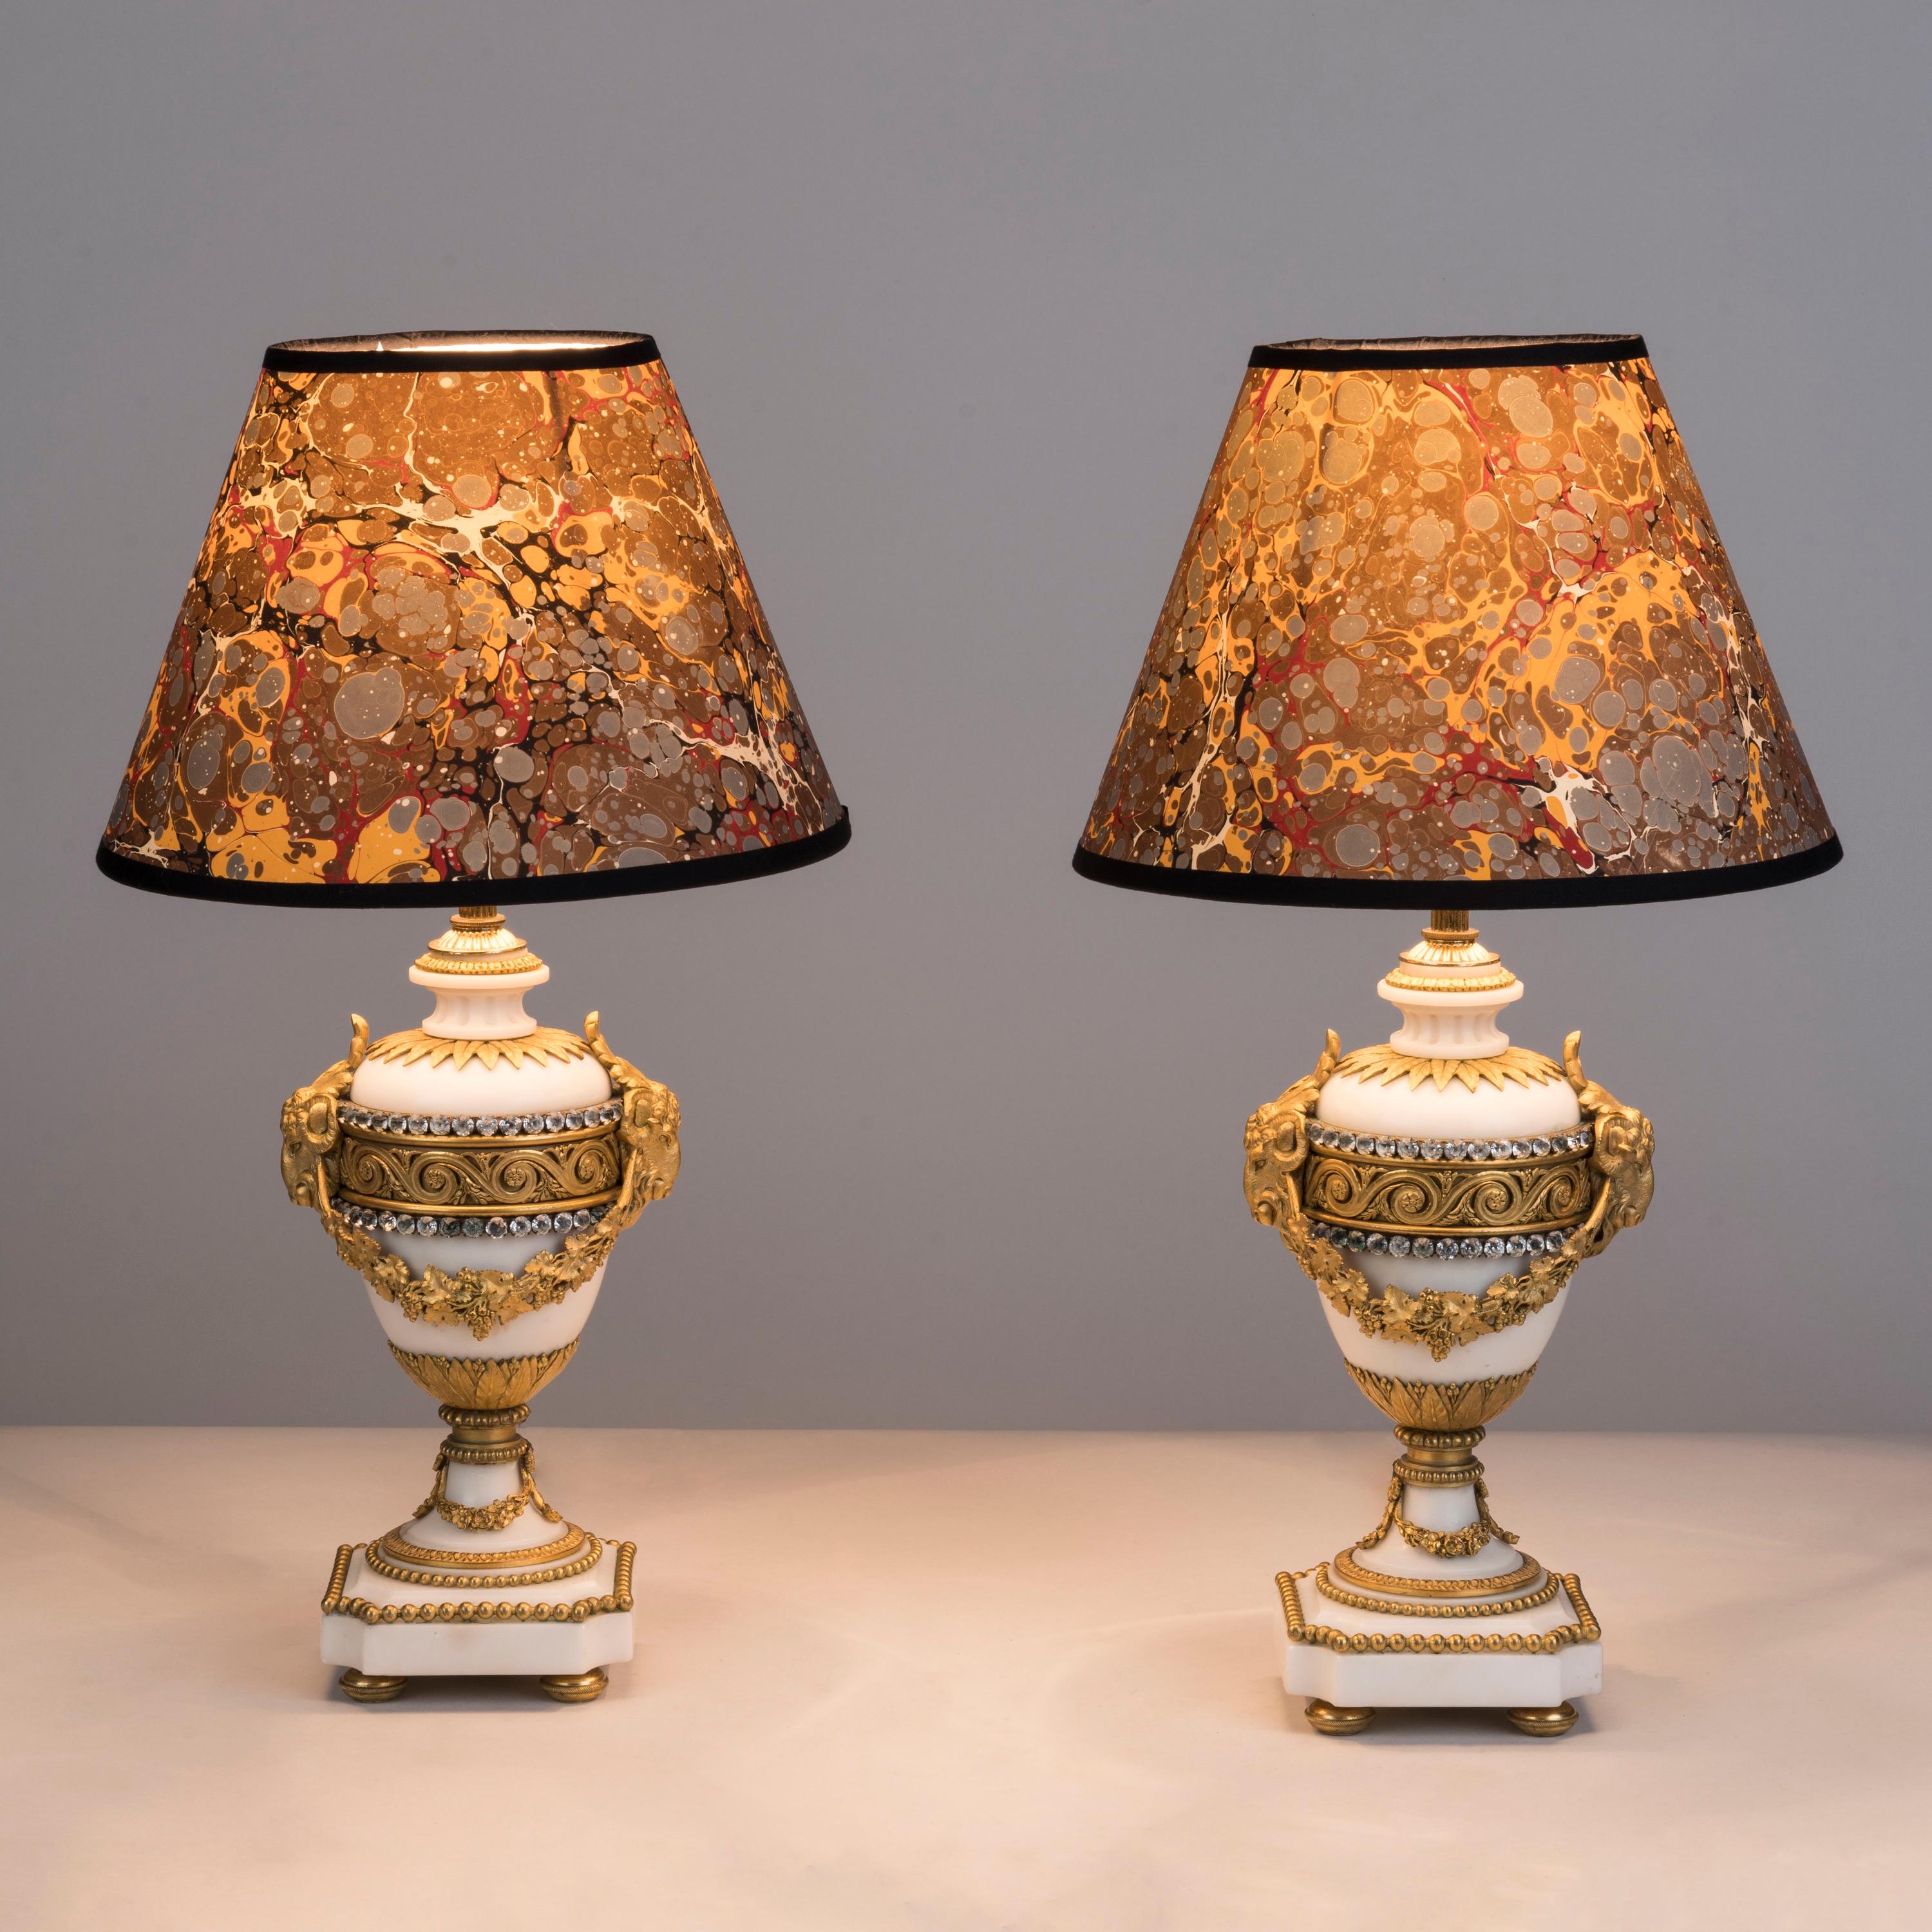 A fine pair of Ormolu-Mounted marble lamps
In the Louis XVI style

Each lamp of exquisite proportion, the ovoid marble bodies with a Grecian wave ormolu collar and mounted with two registers of jewels, with a ram's head to either side interlinked